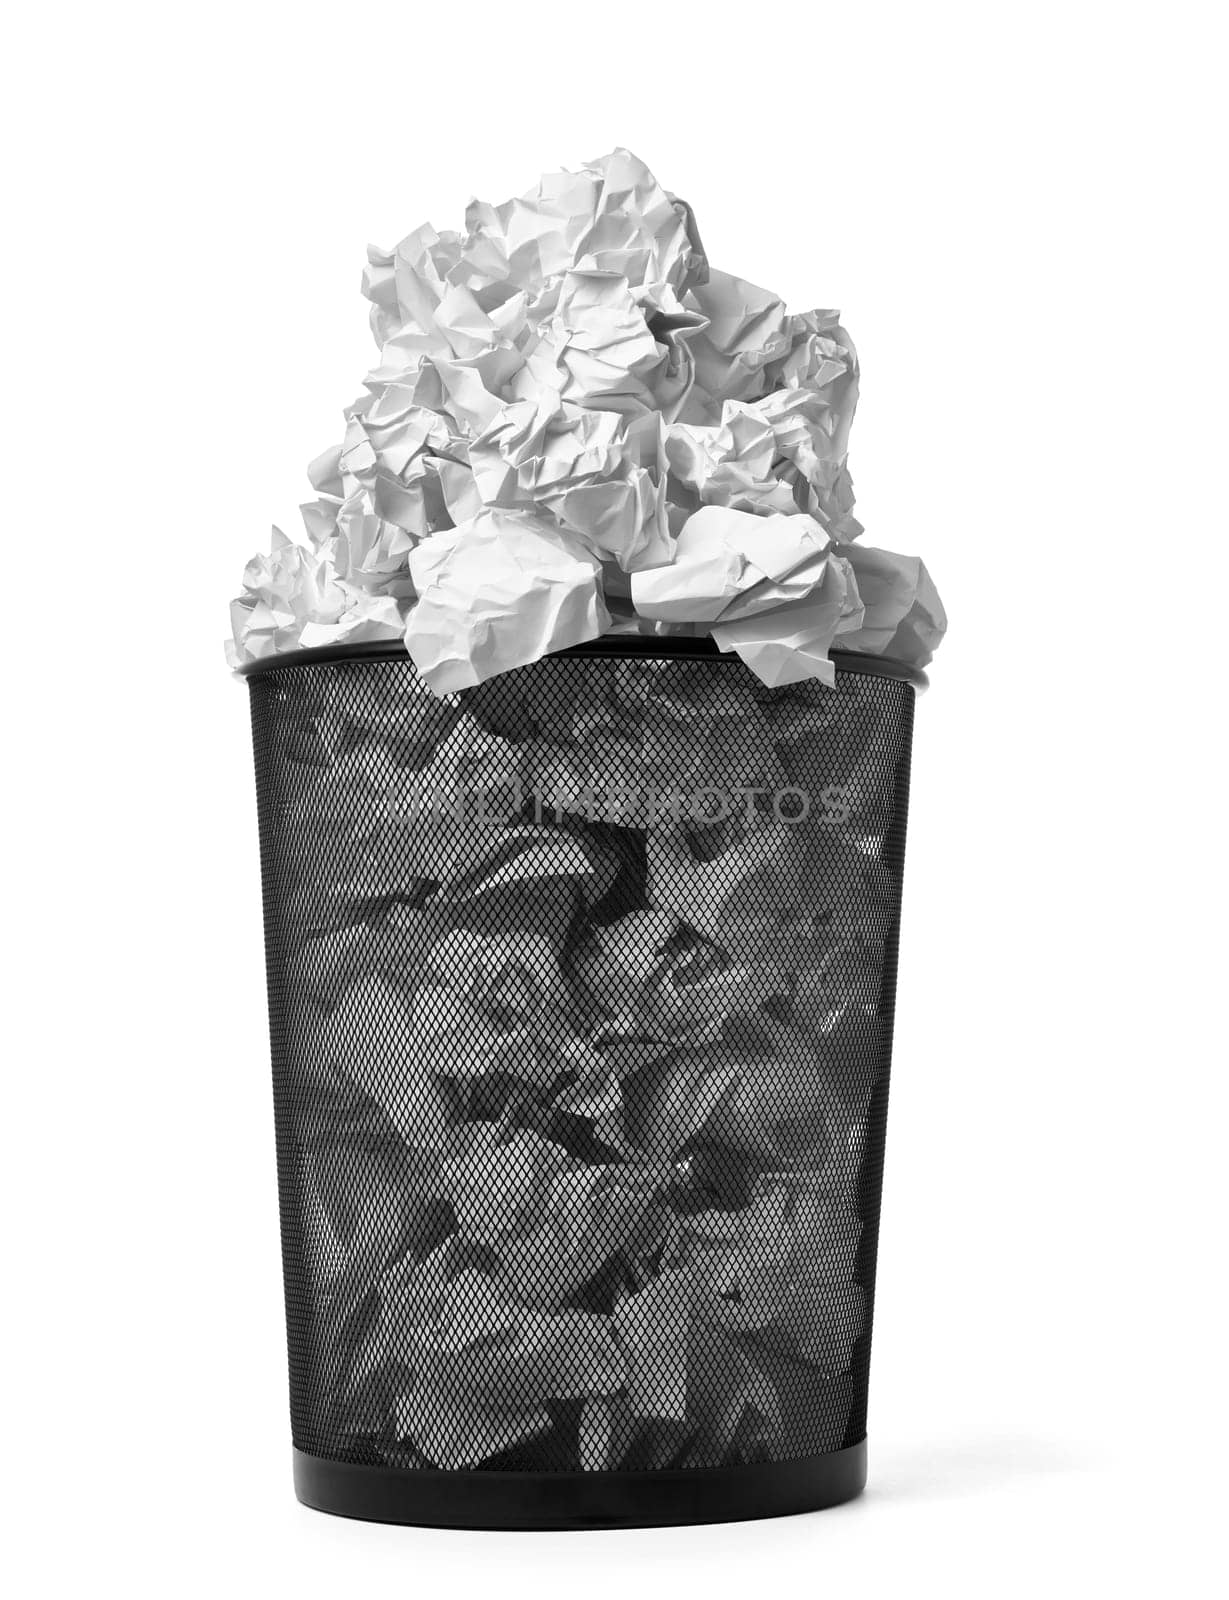 close up of a paper ball trash bin rubbish on white background